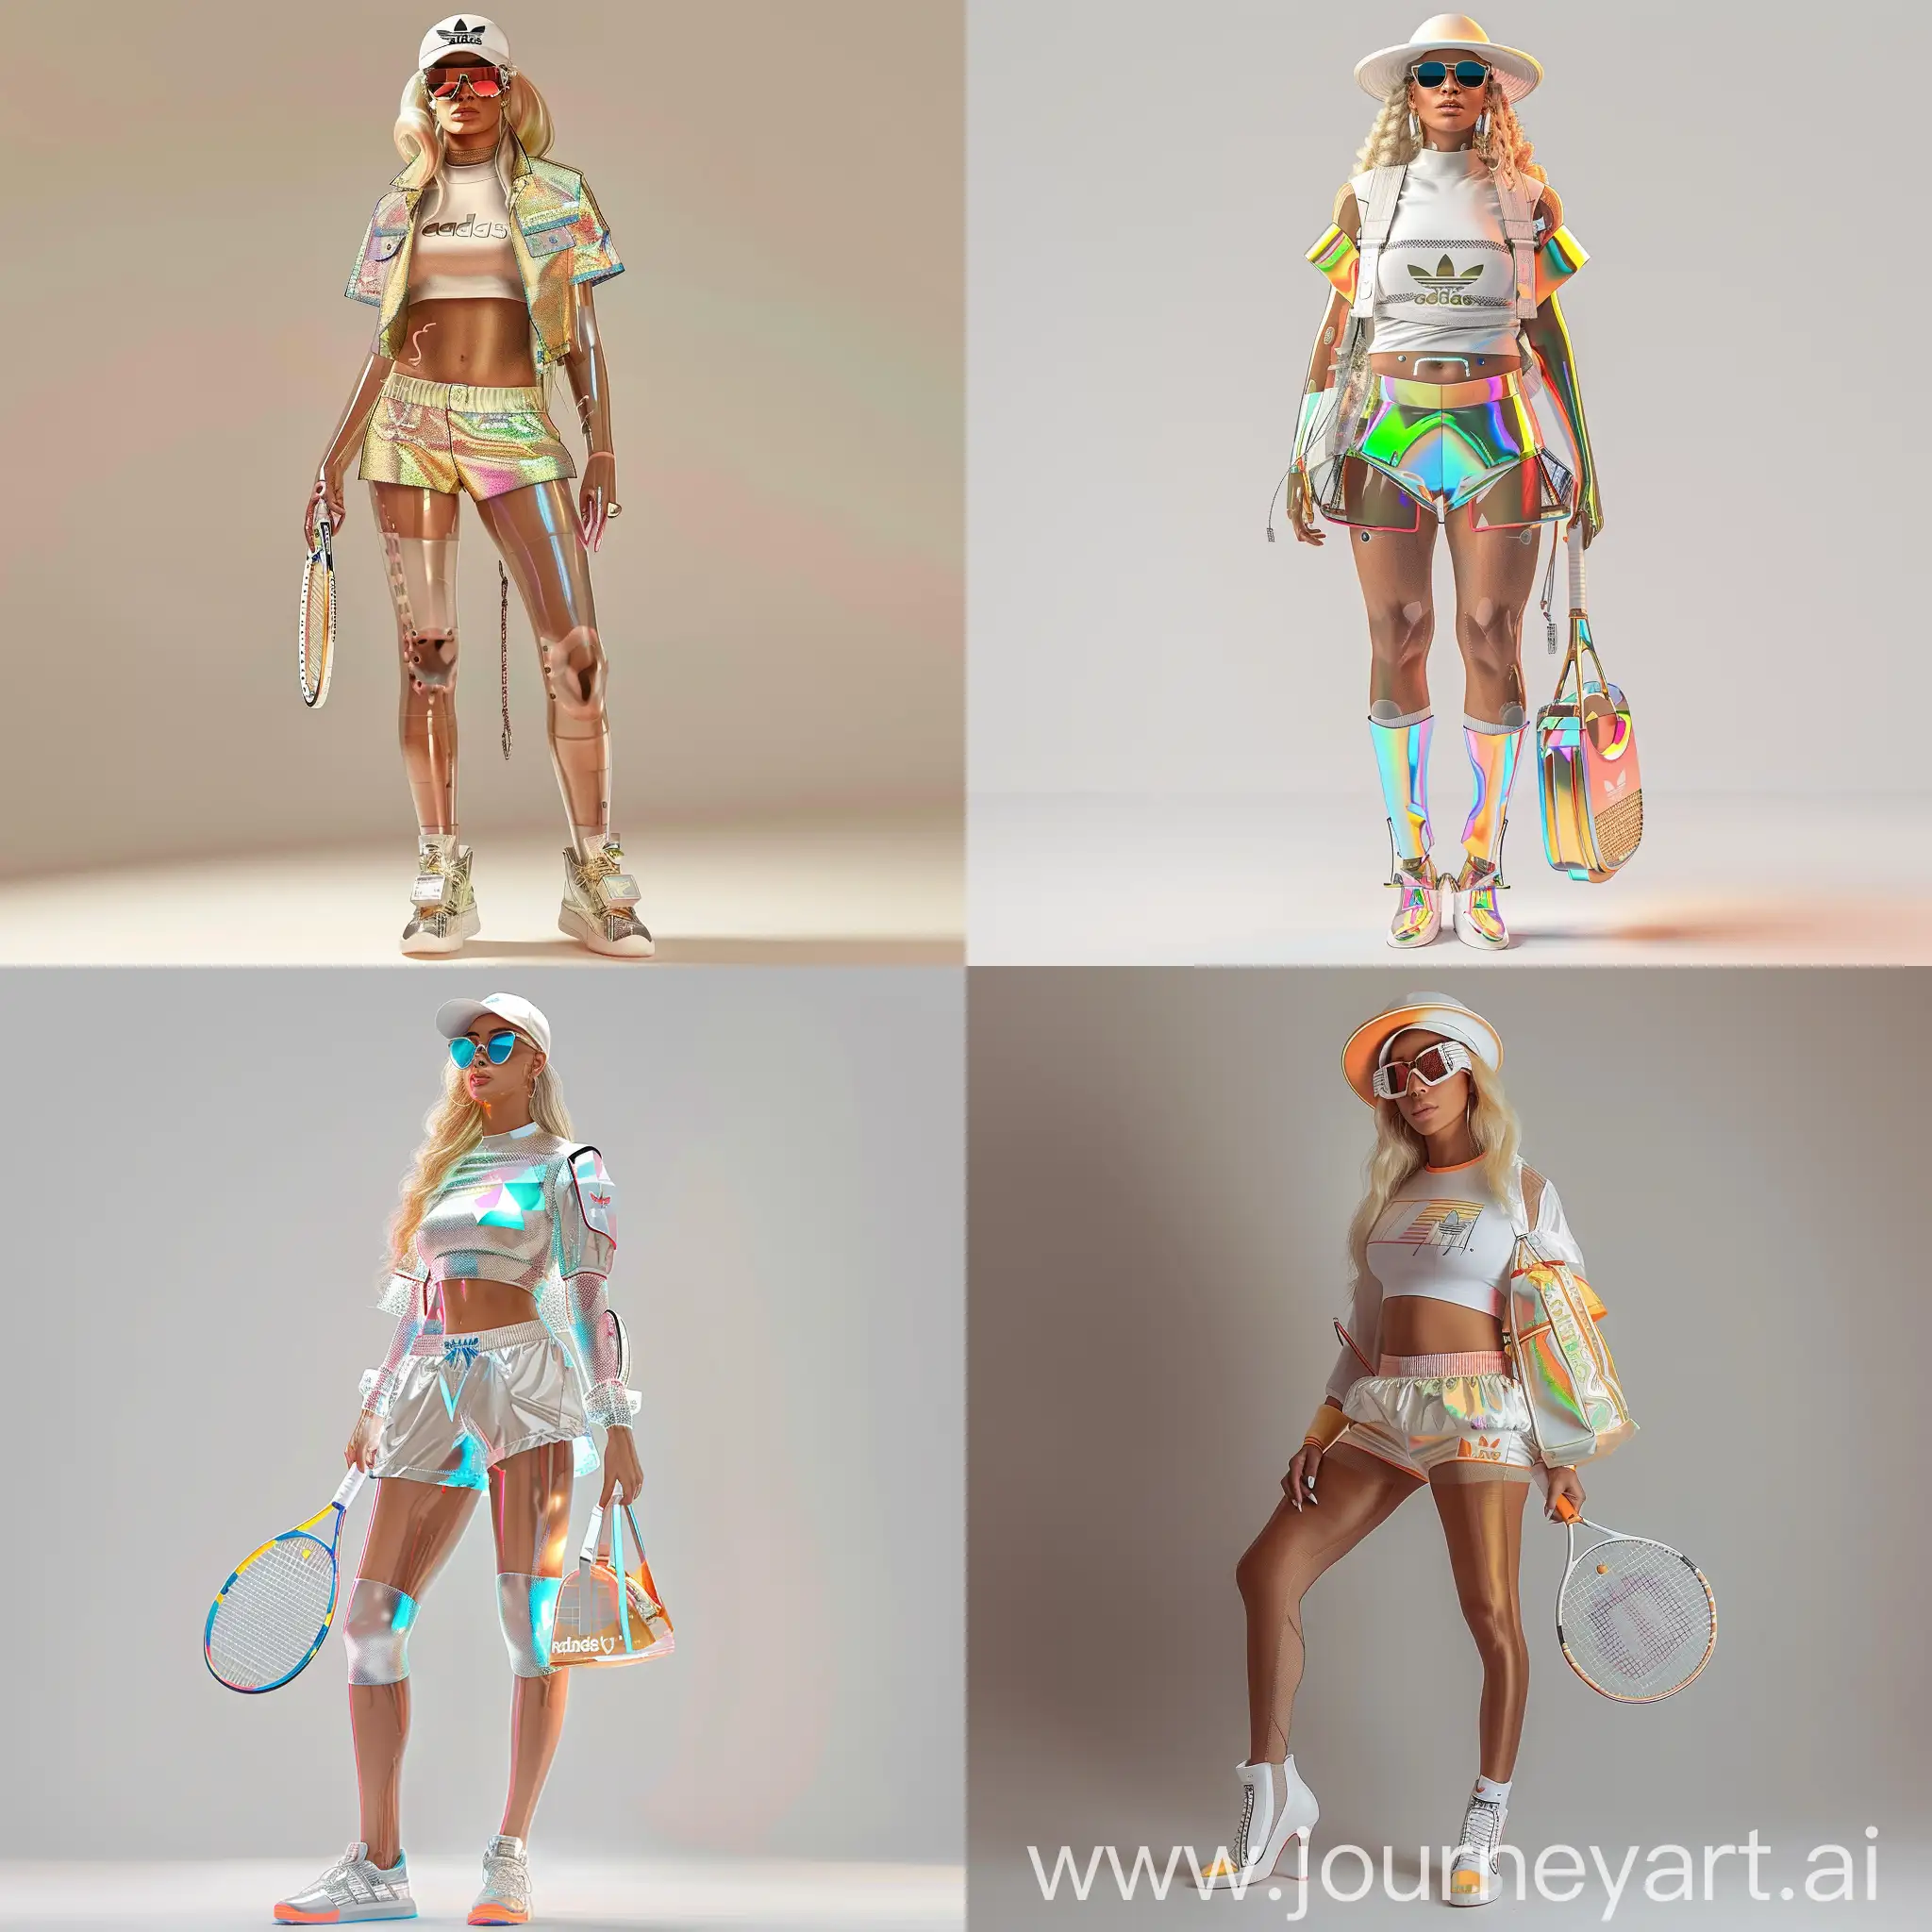  blonde fullbody woman in futuristic adidas outfit inspired in beyoncé style, the outfit includes tenis, hat, short, tshirt, bag, sunglass, high heels